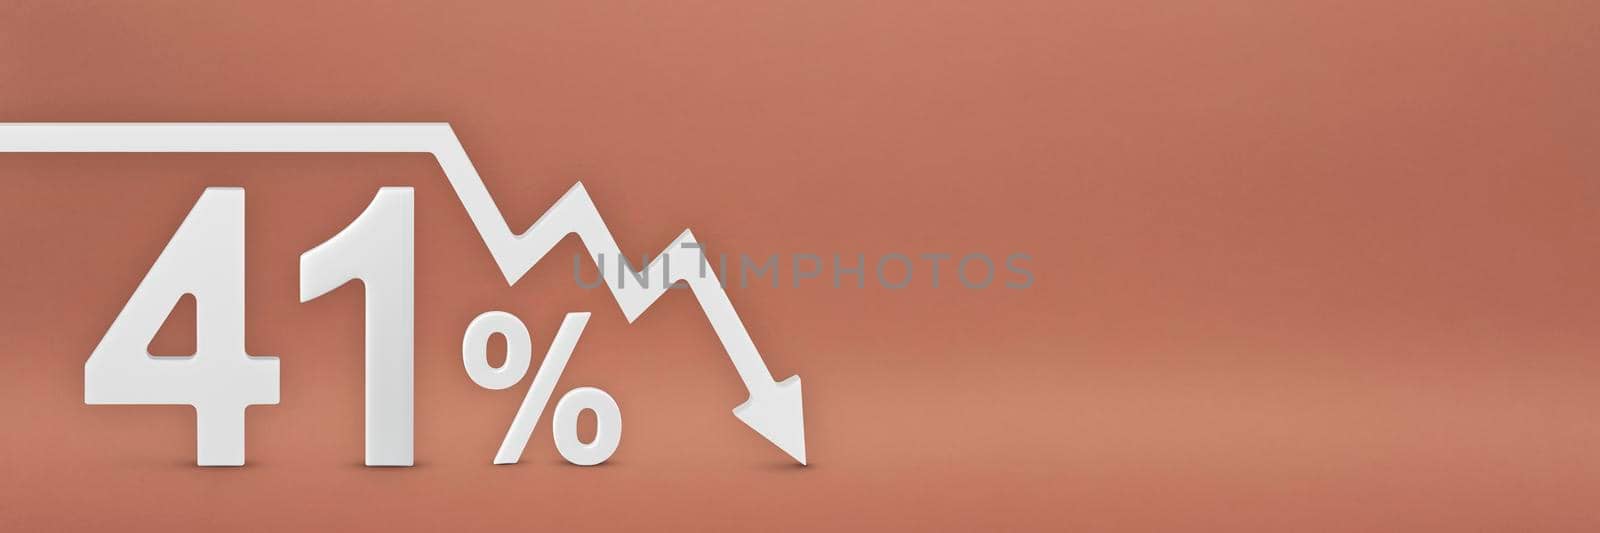 forty-one percent, the arrow on the graph is pointing down. Stock market crash, bear market, inflation.Economic collapse, collapse of stocks.3d banner,41 percent discount sign on a red background. by SERSOL